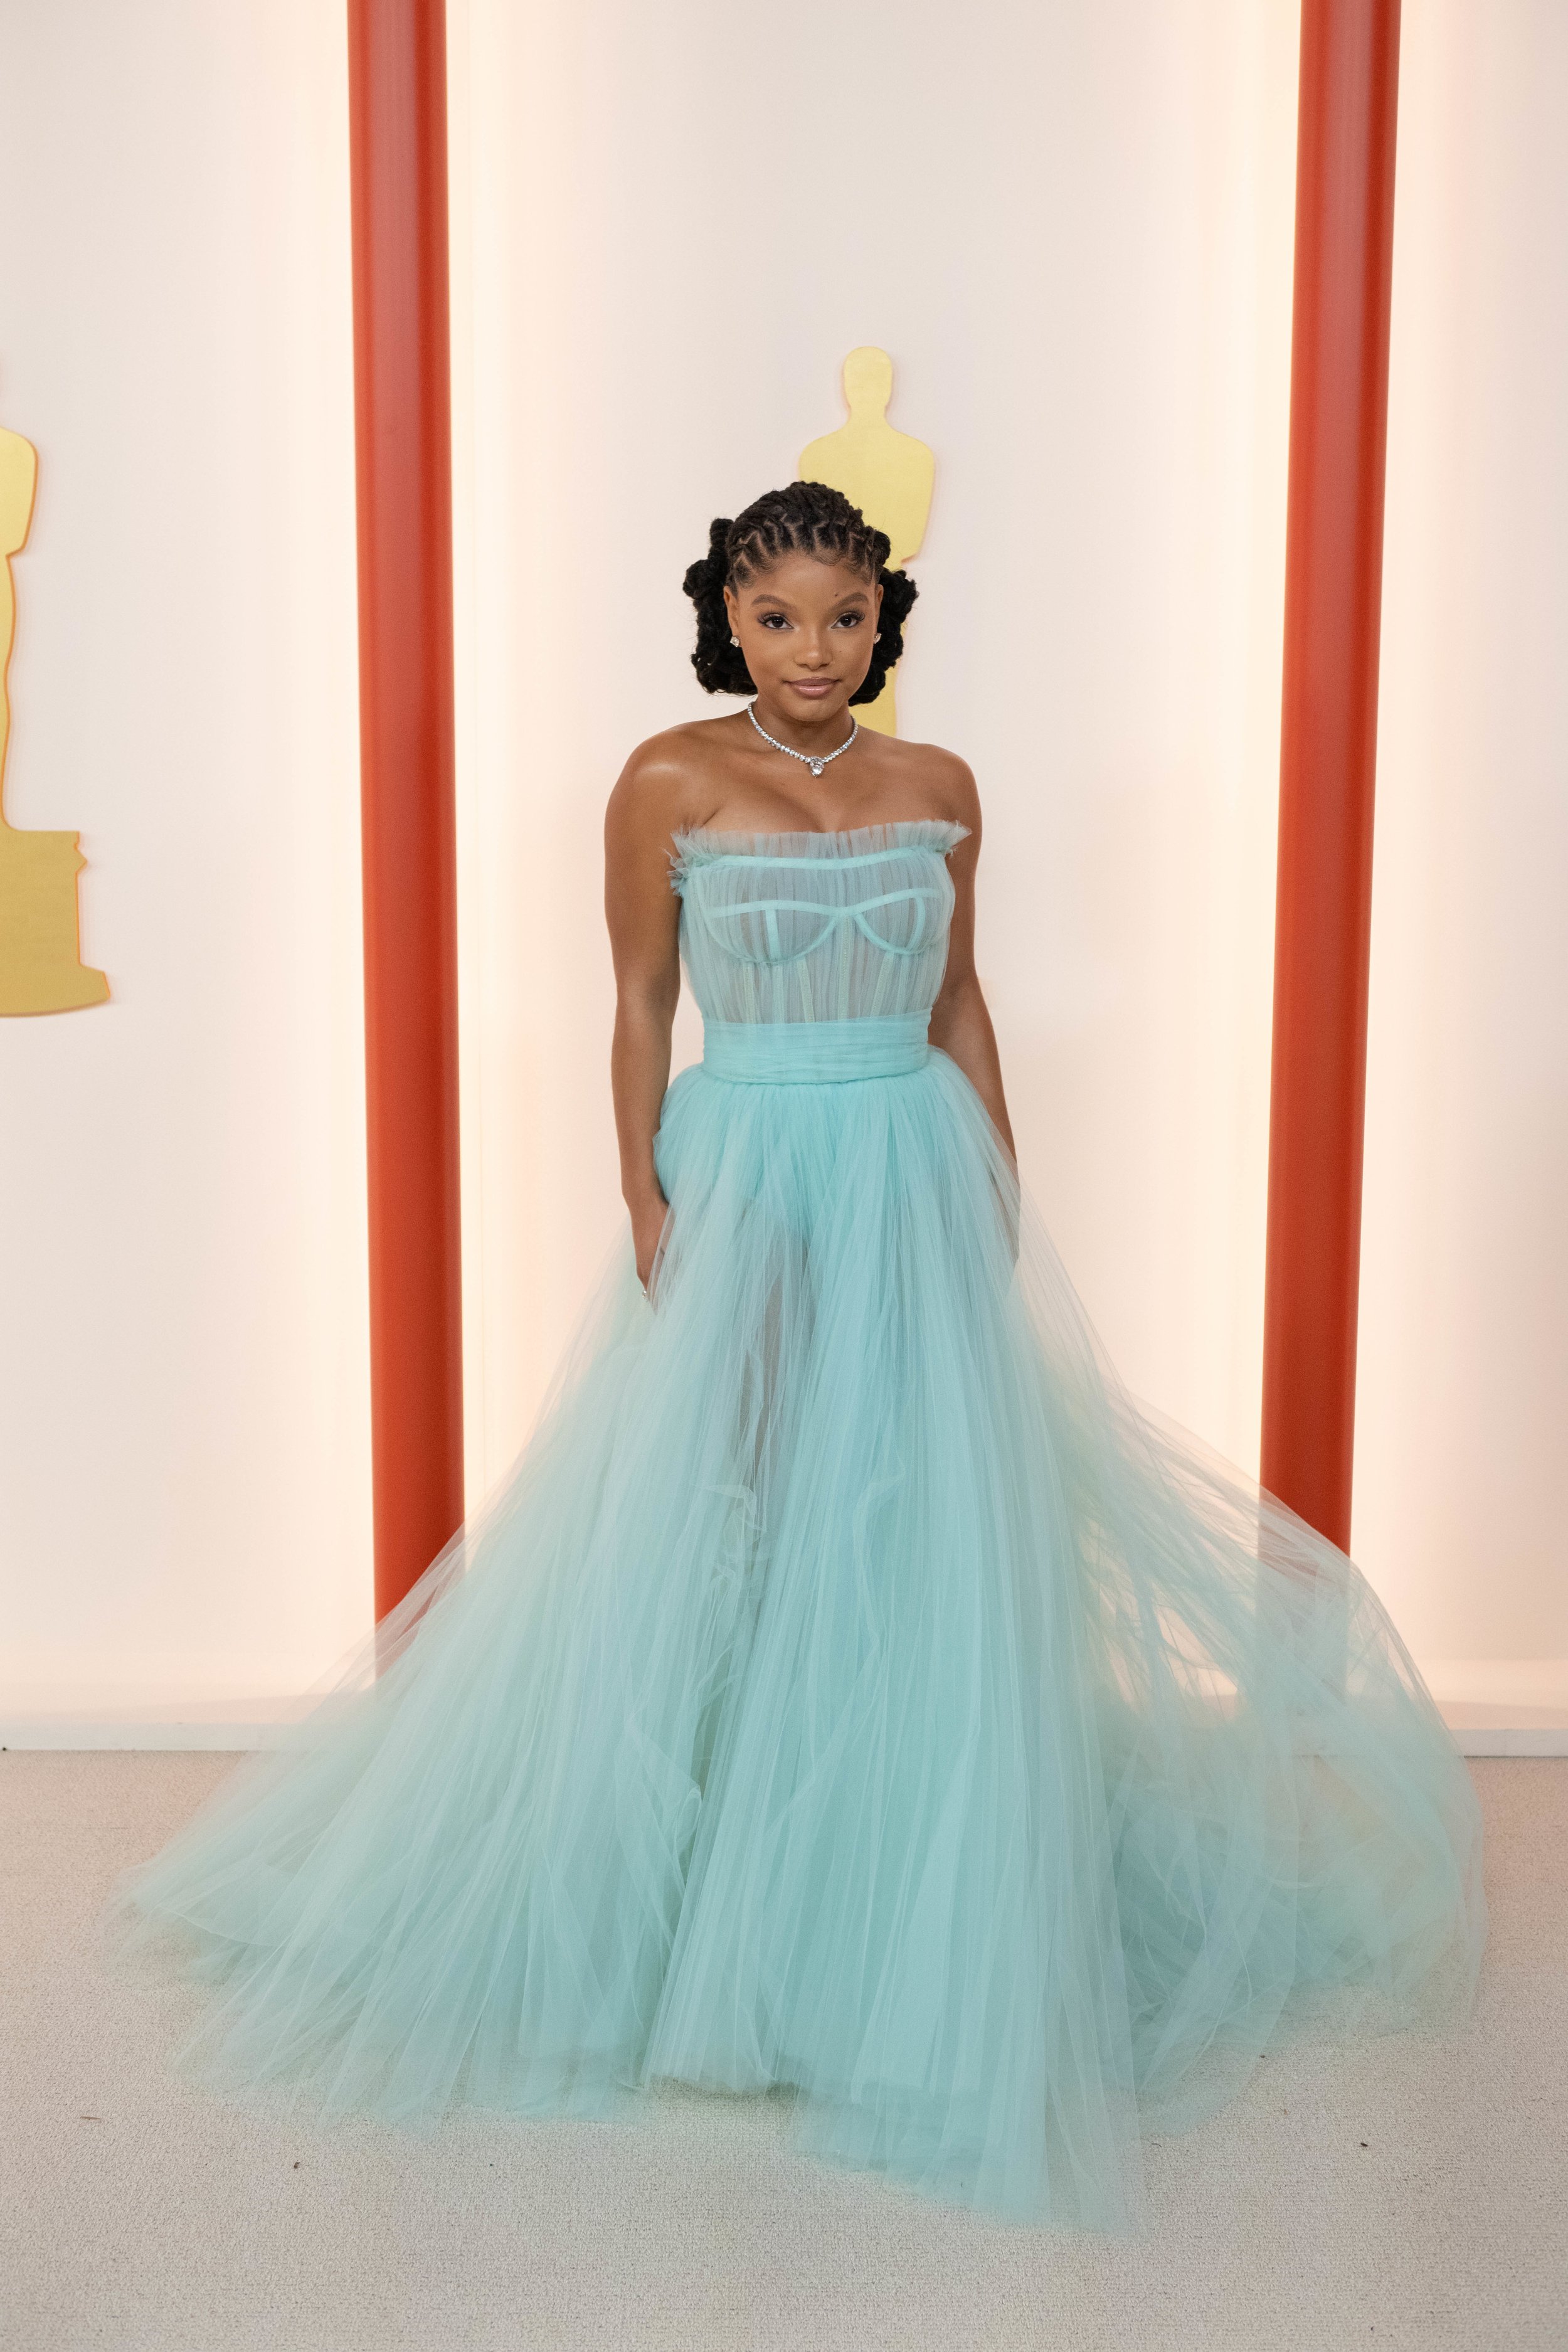 Halle Bailey arrives on the red carpet of the 95th Oscars® at the Dolby